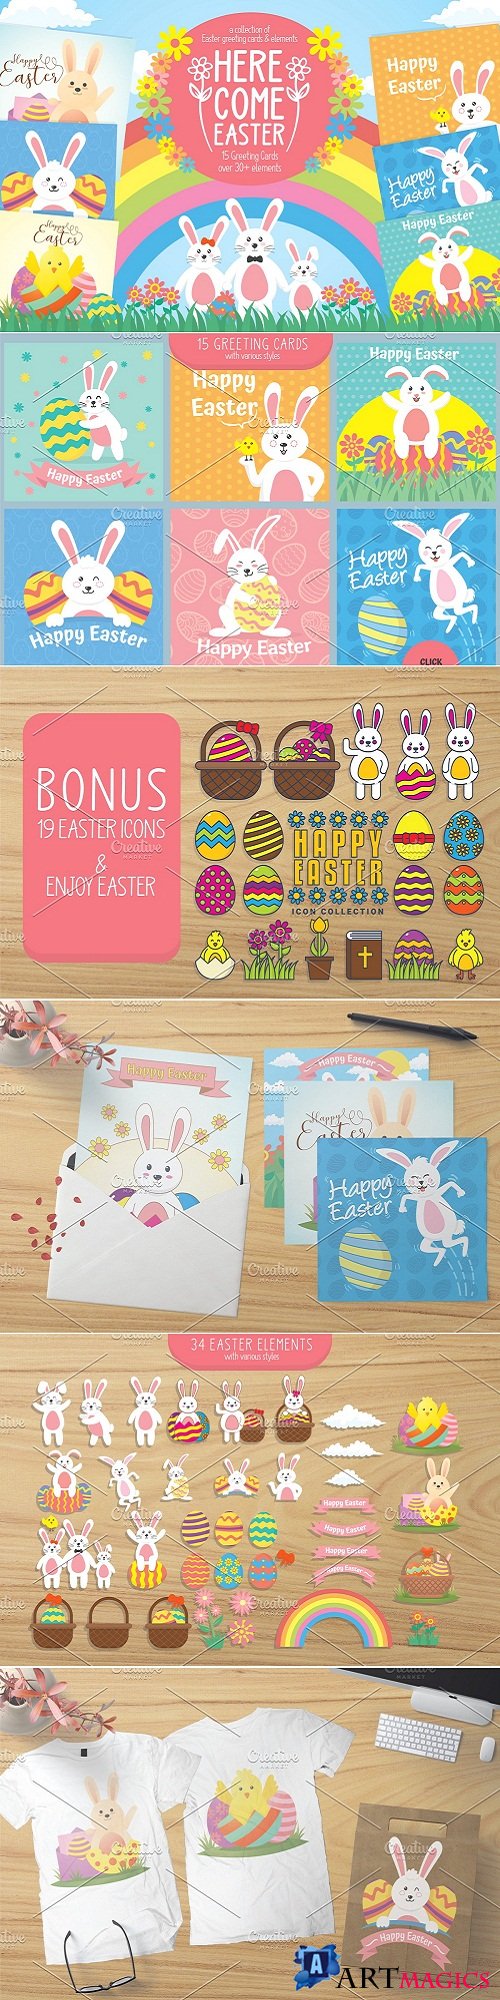 Easter greeting cards & elements 2371122